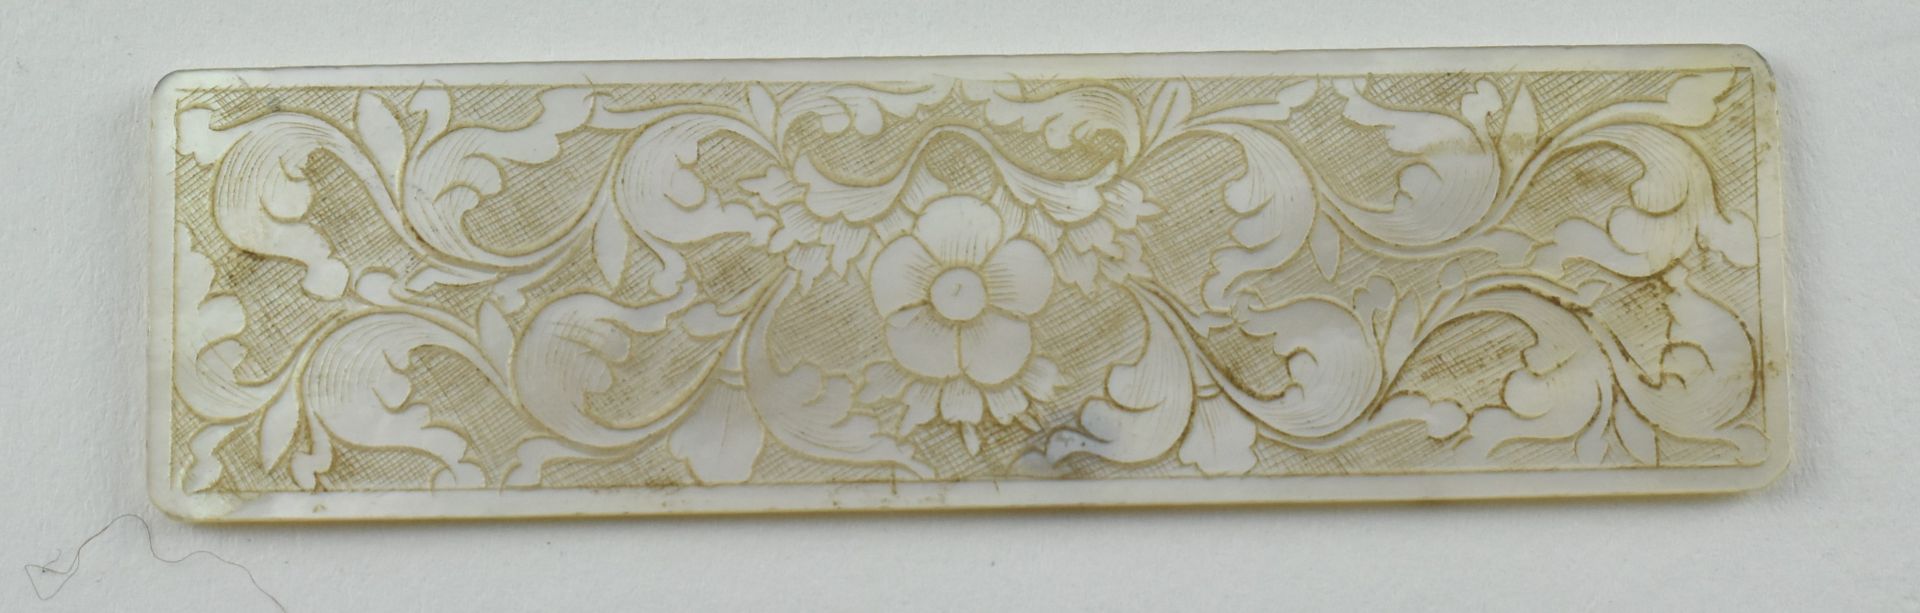 QING DYNASTY MOTHER OF PEARL GAMING TOKENS 清十三行贝母筹码 - Image 11 of 11